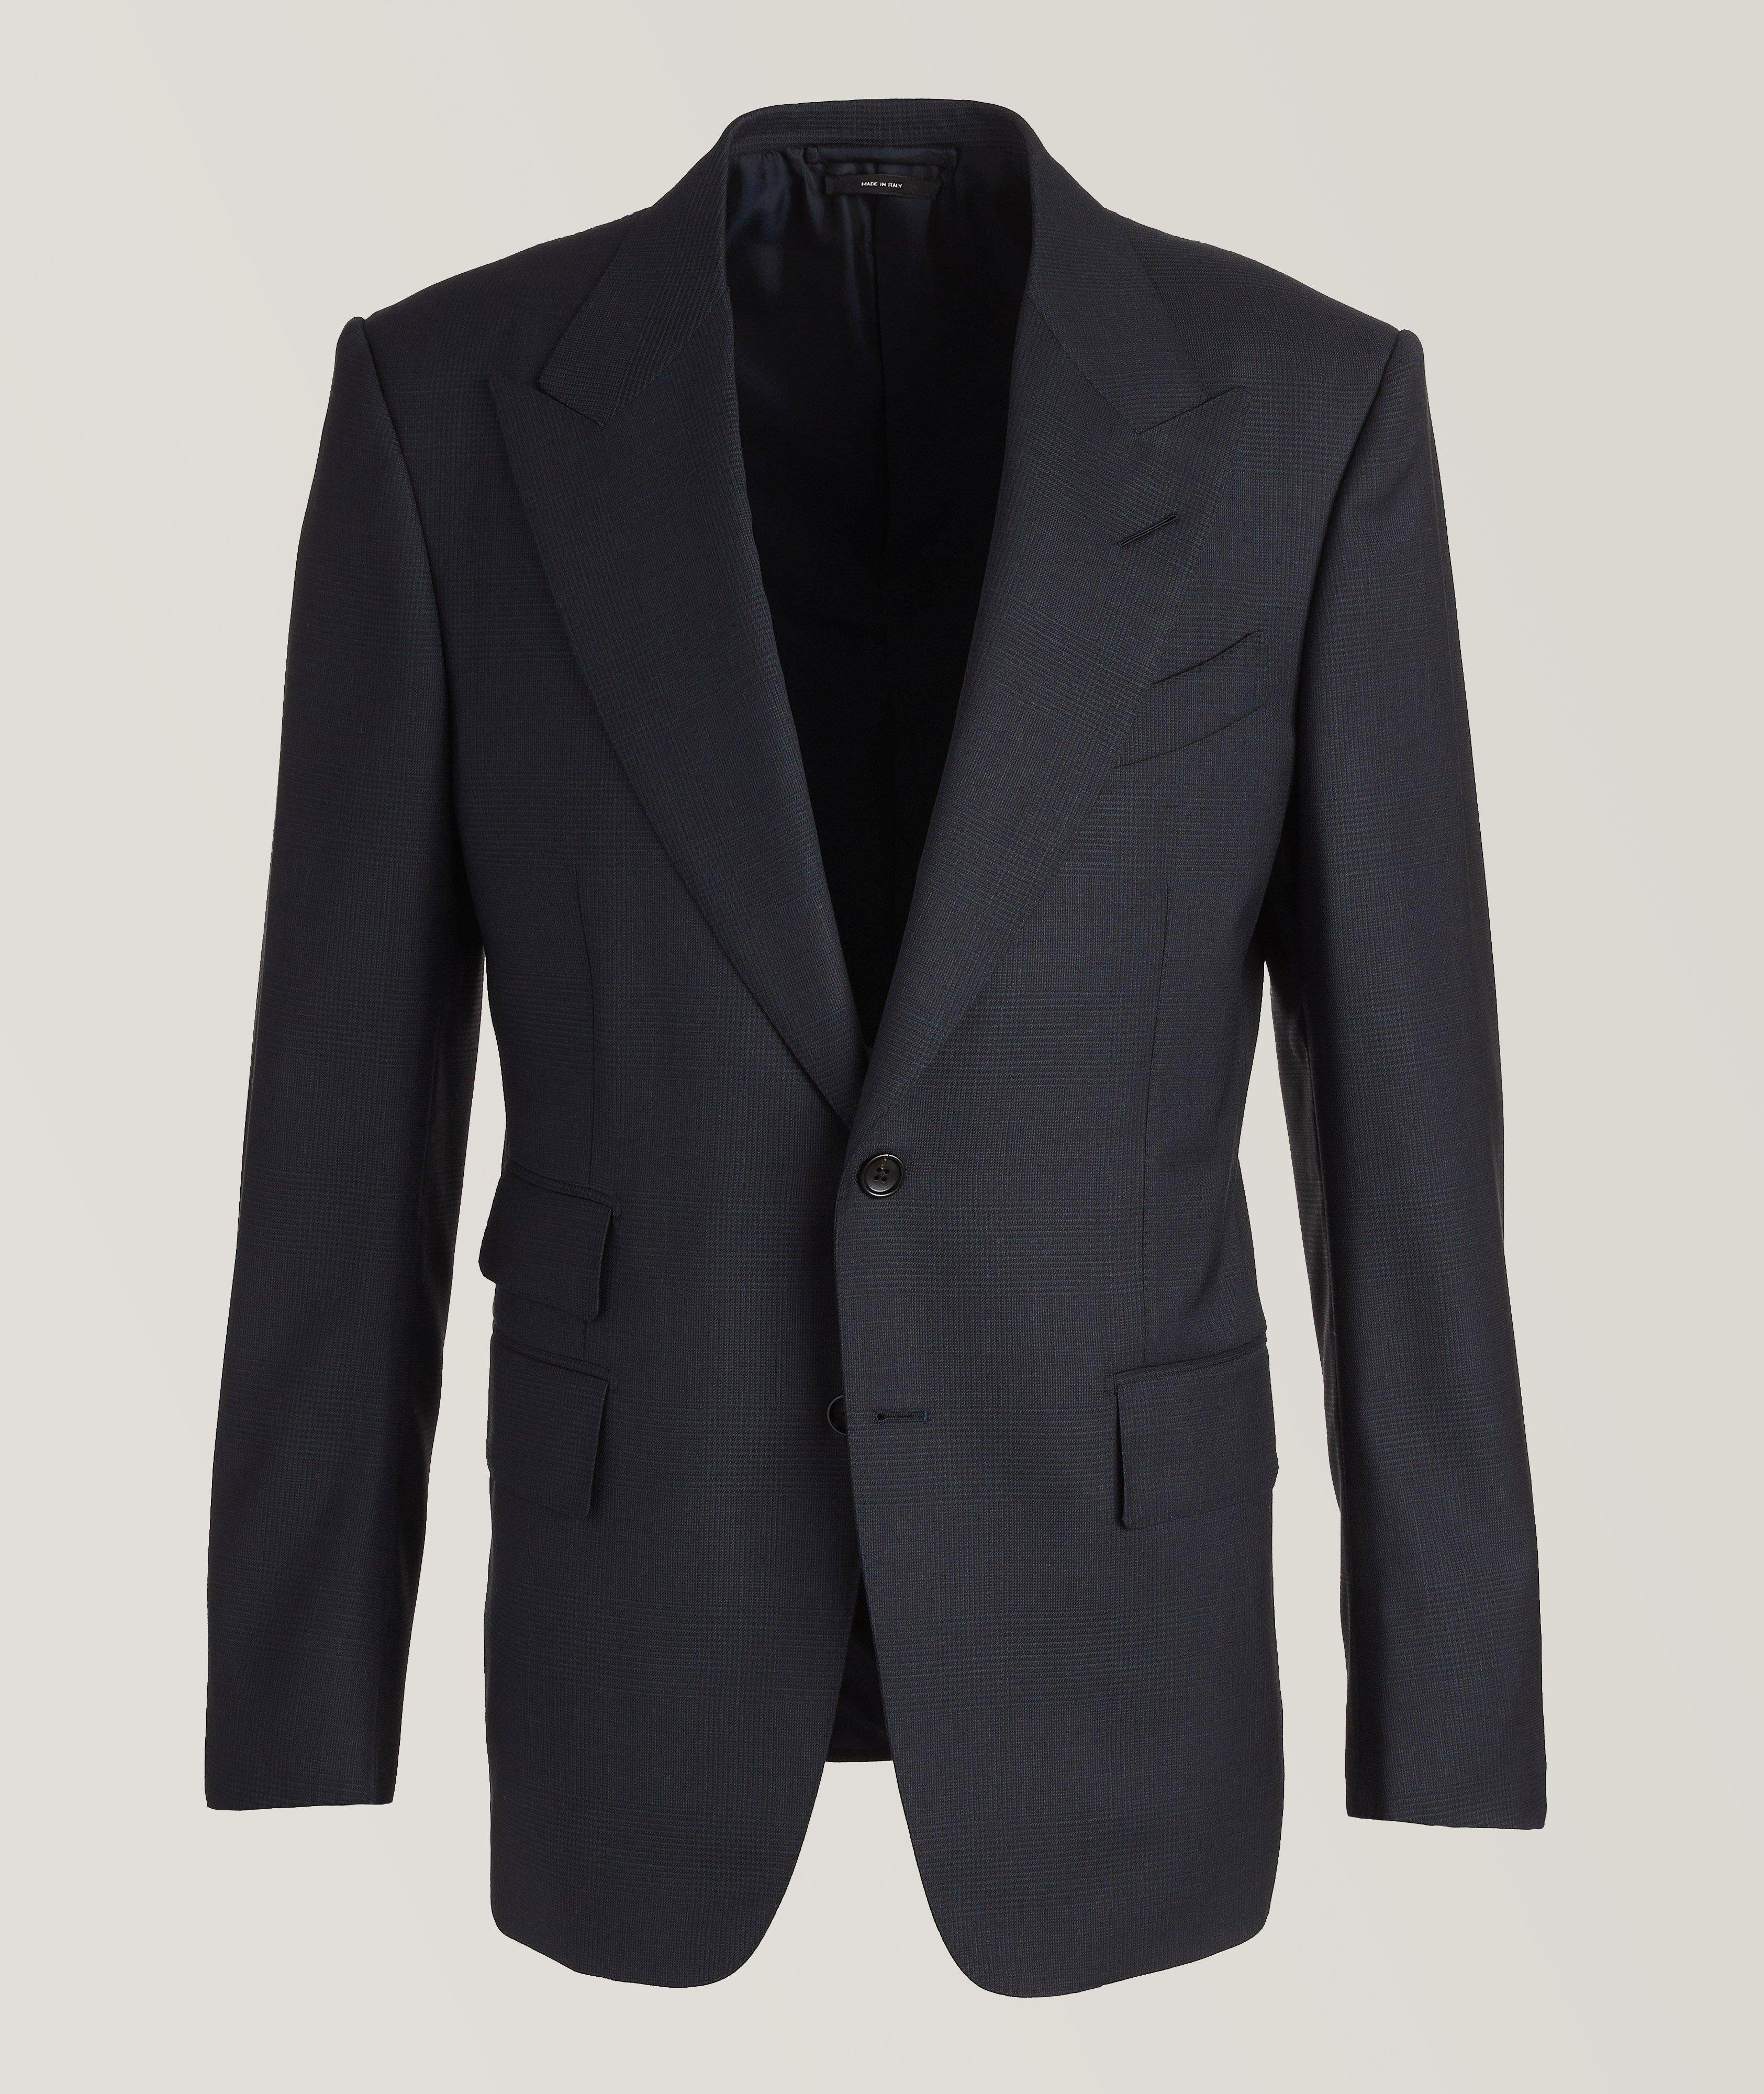 Shelton Prince of Wales Stretch Wool Suit image 0